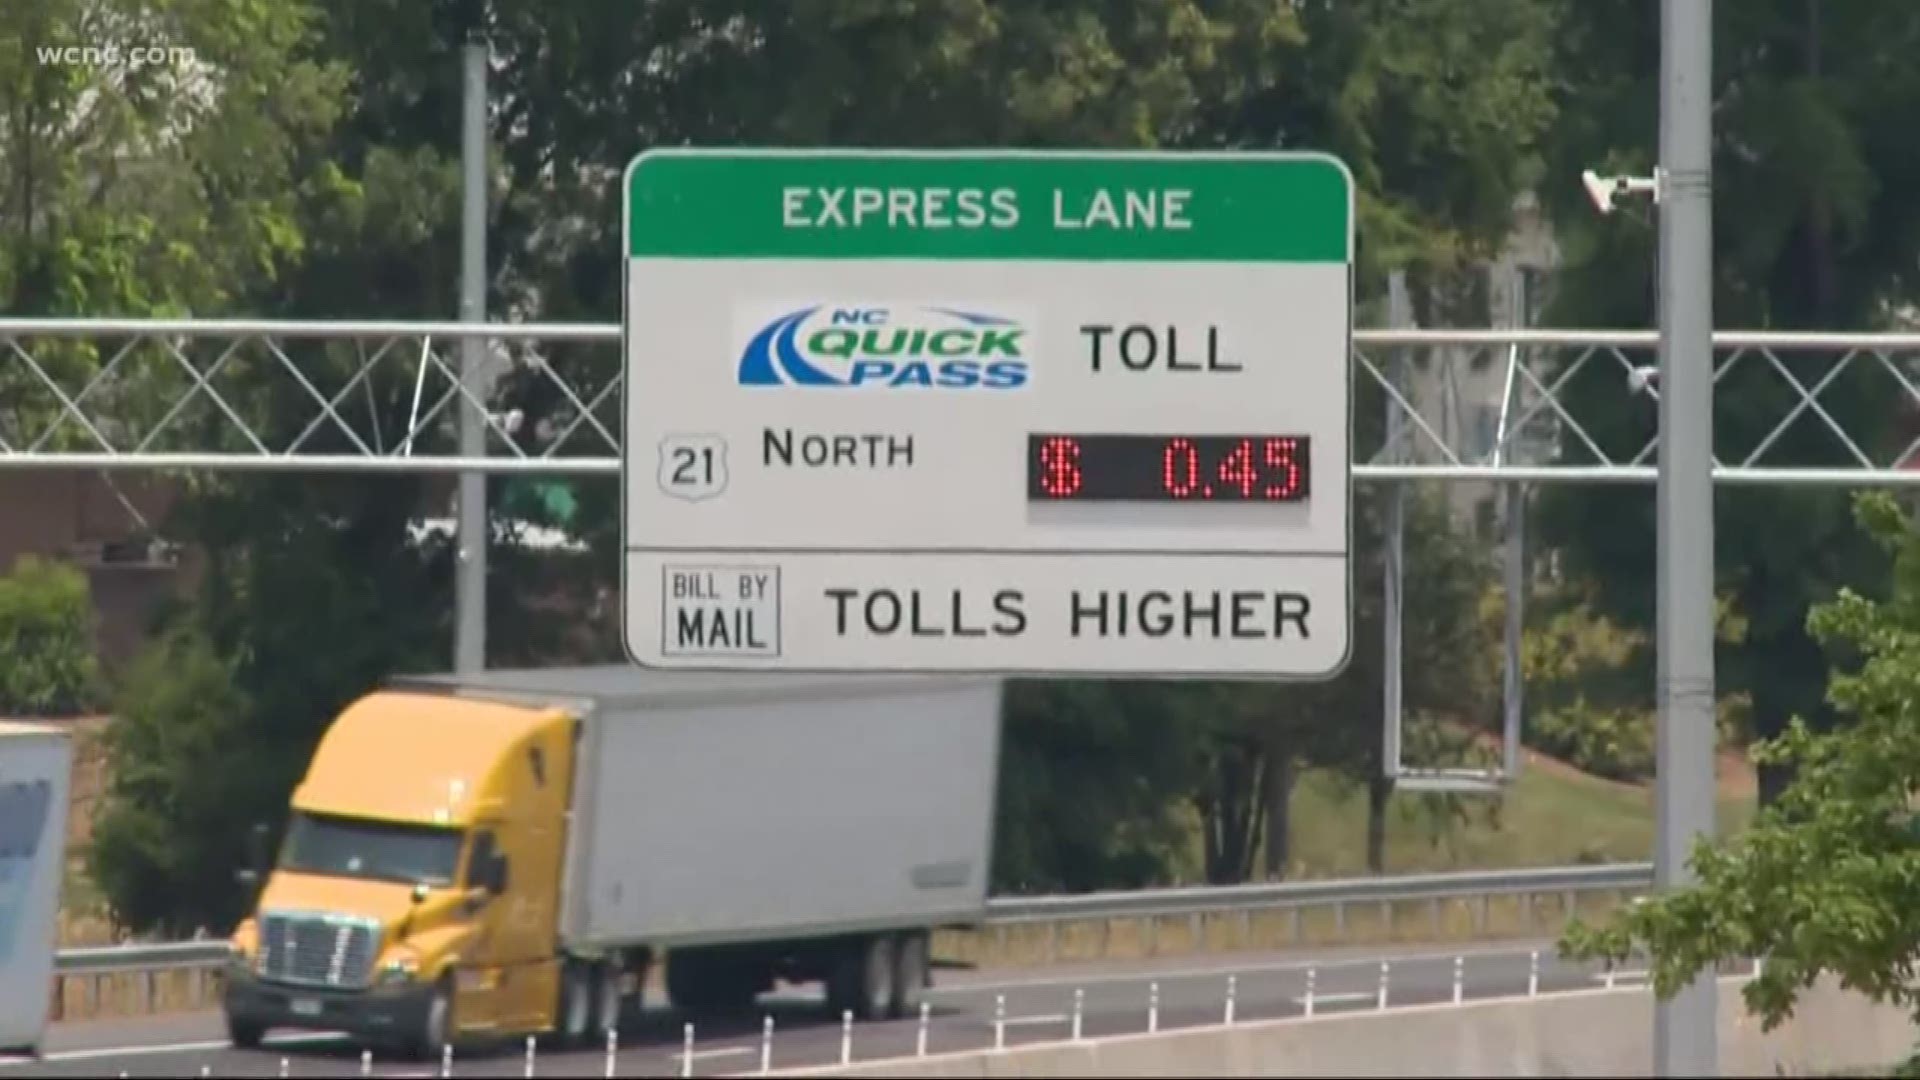 The price on the sign at the entrance to the toll lane is the price for that section only. Since the toll lanes are split into multiple segments, depending on how far you drive, you can quickly have multiple charges.